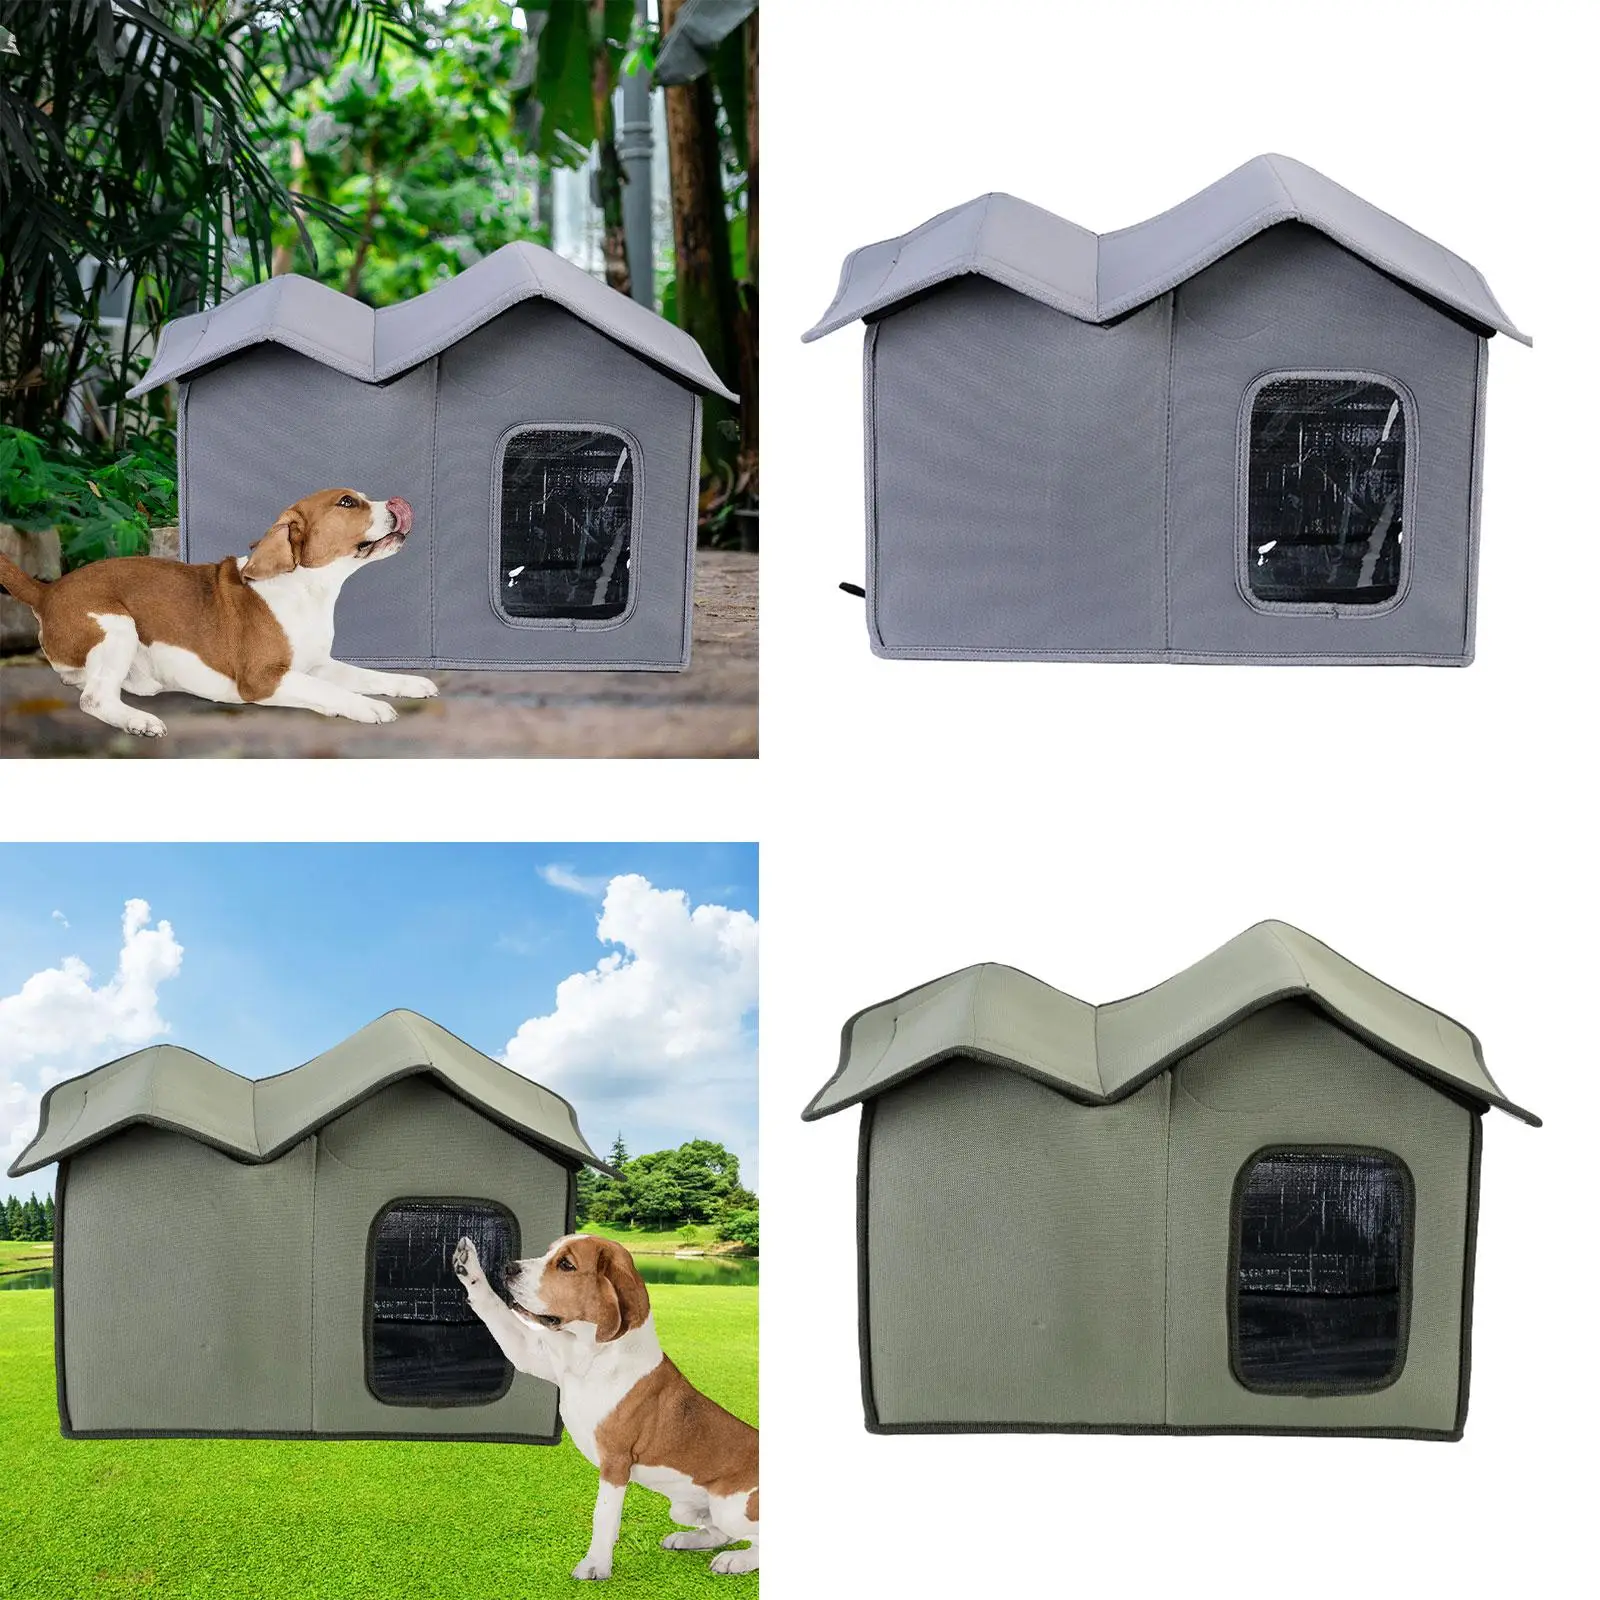 Feral Cat House Waterproof Oxford Cloth Dog House Collapsible Pet Shelter for Courtyard Home Outdoor Cats and Small Dogs Indoor